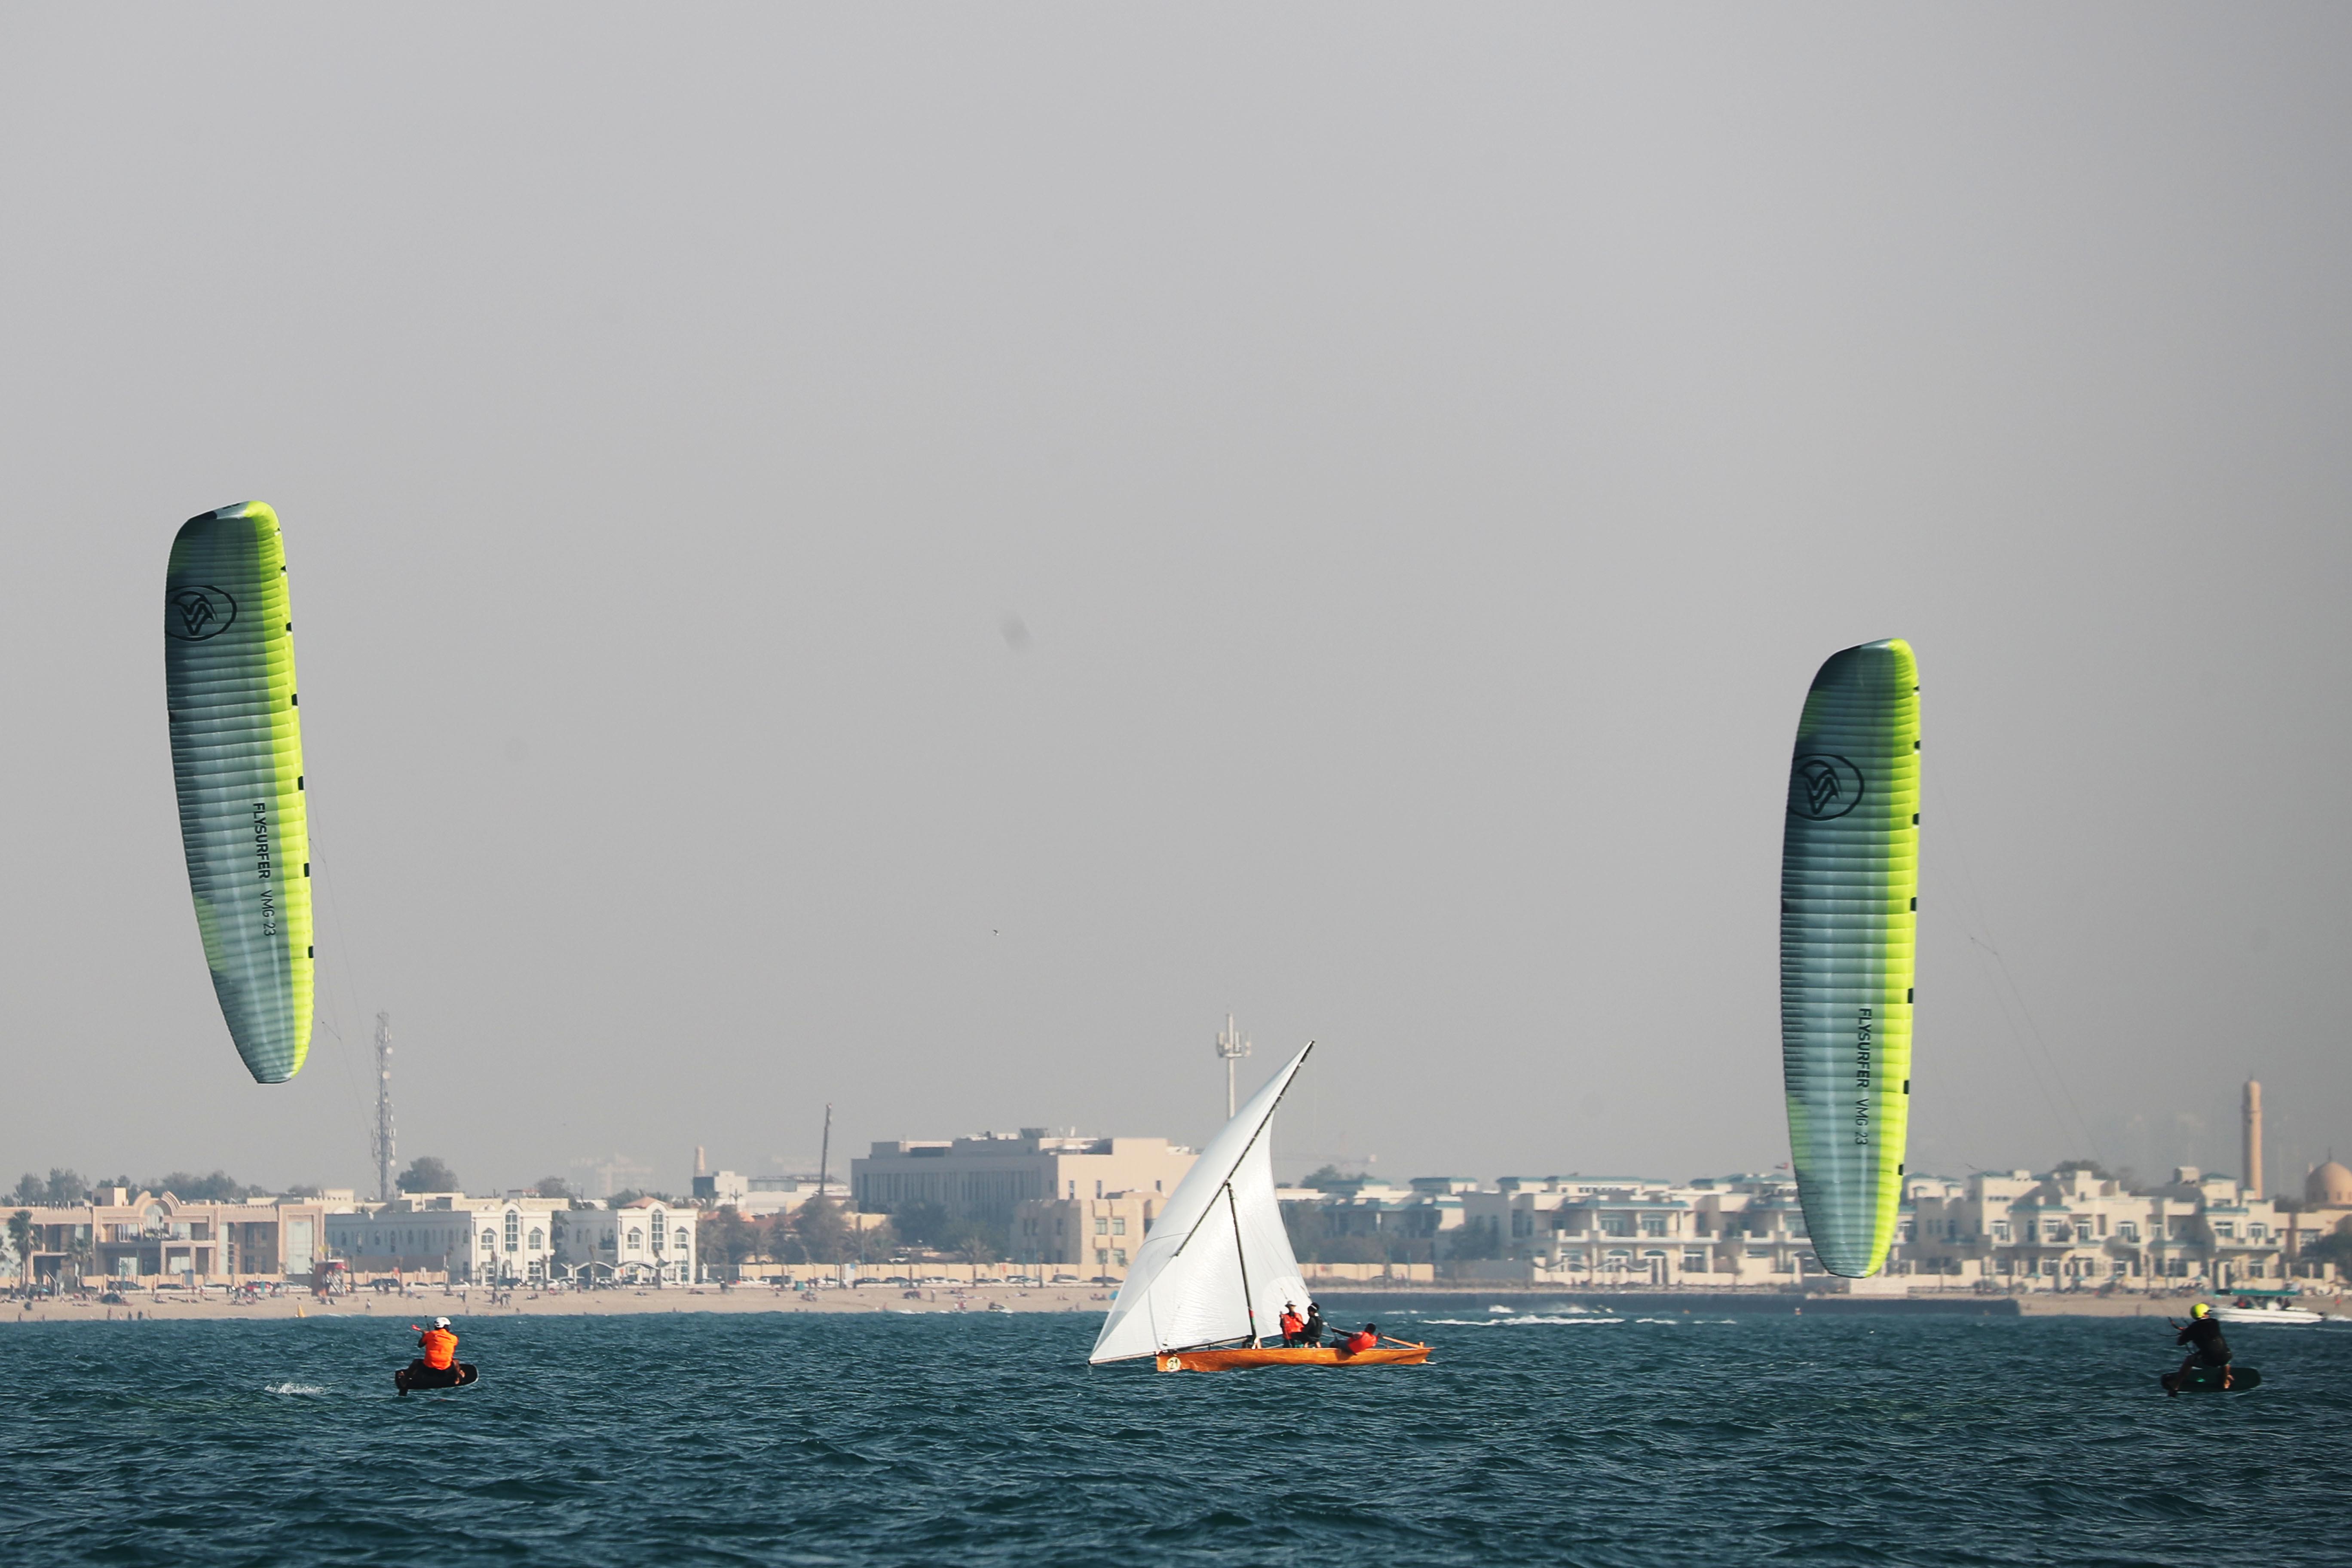 DIMC to Start the New Watersports Season on 18th of September